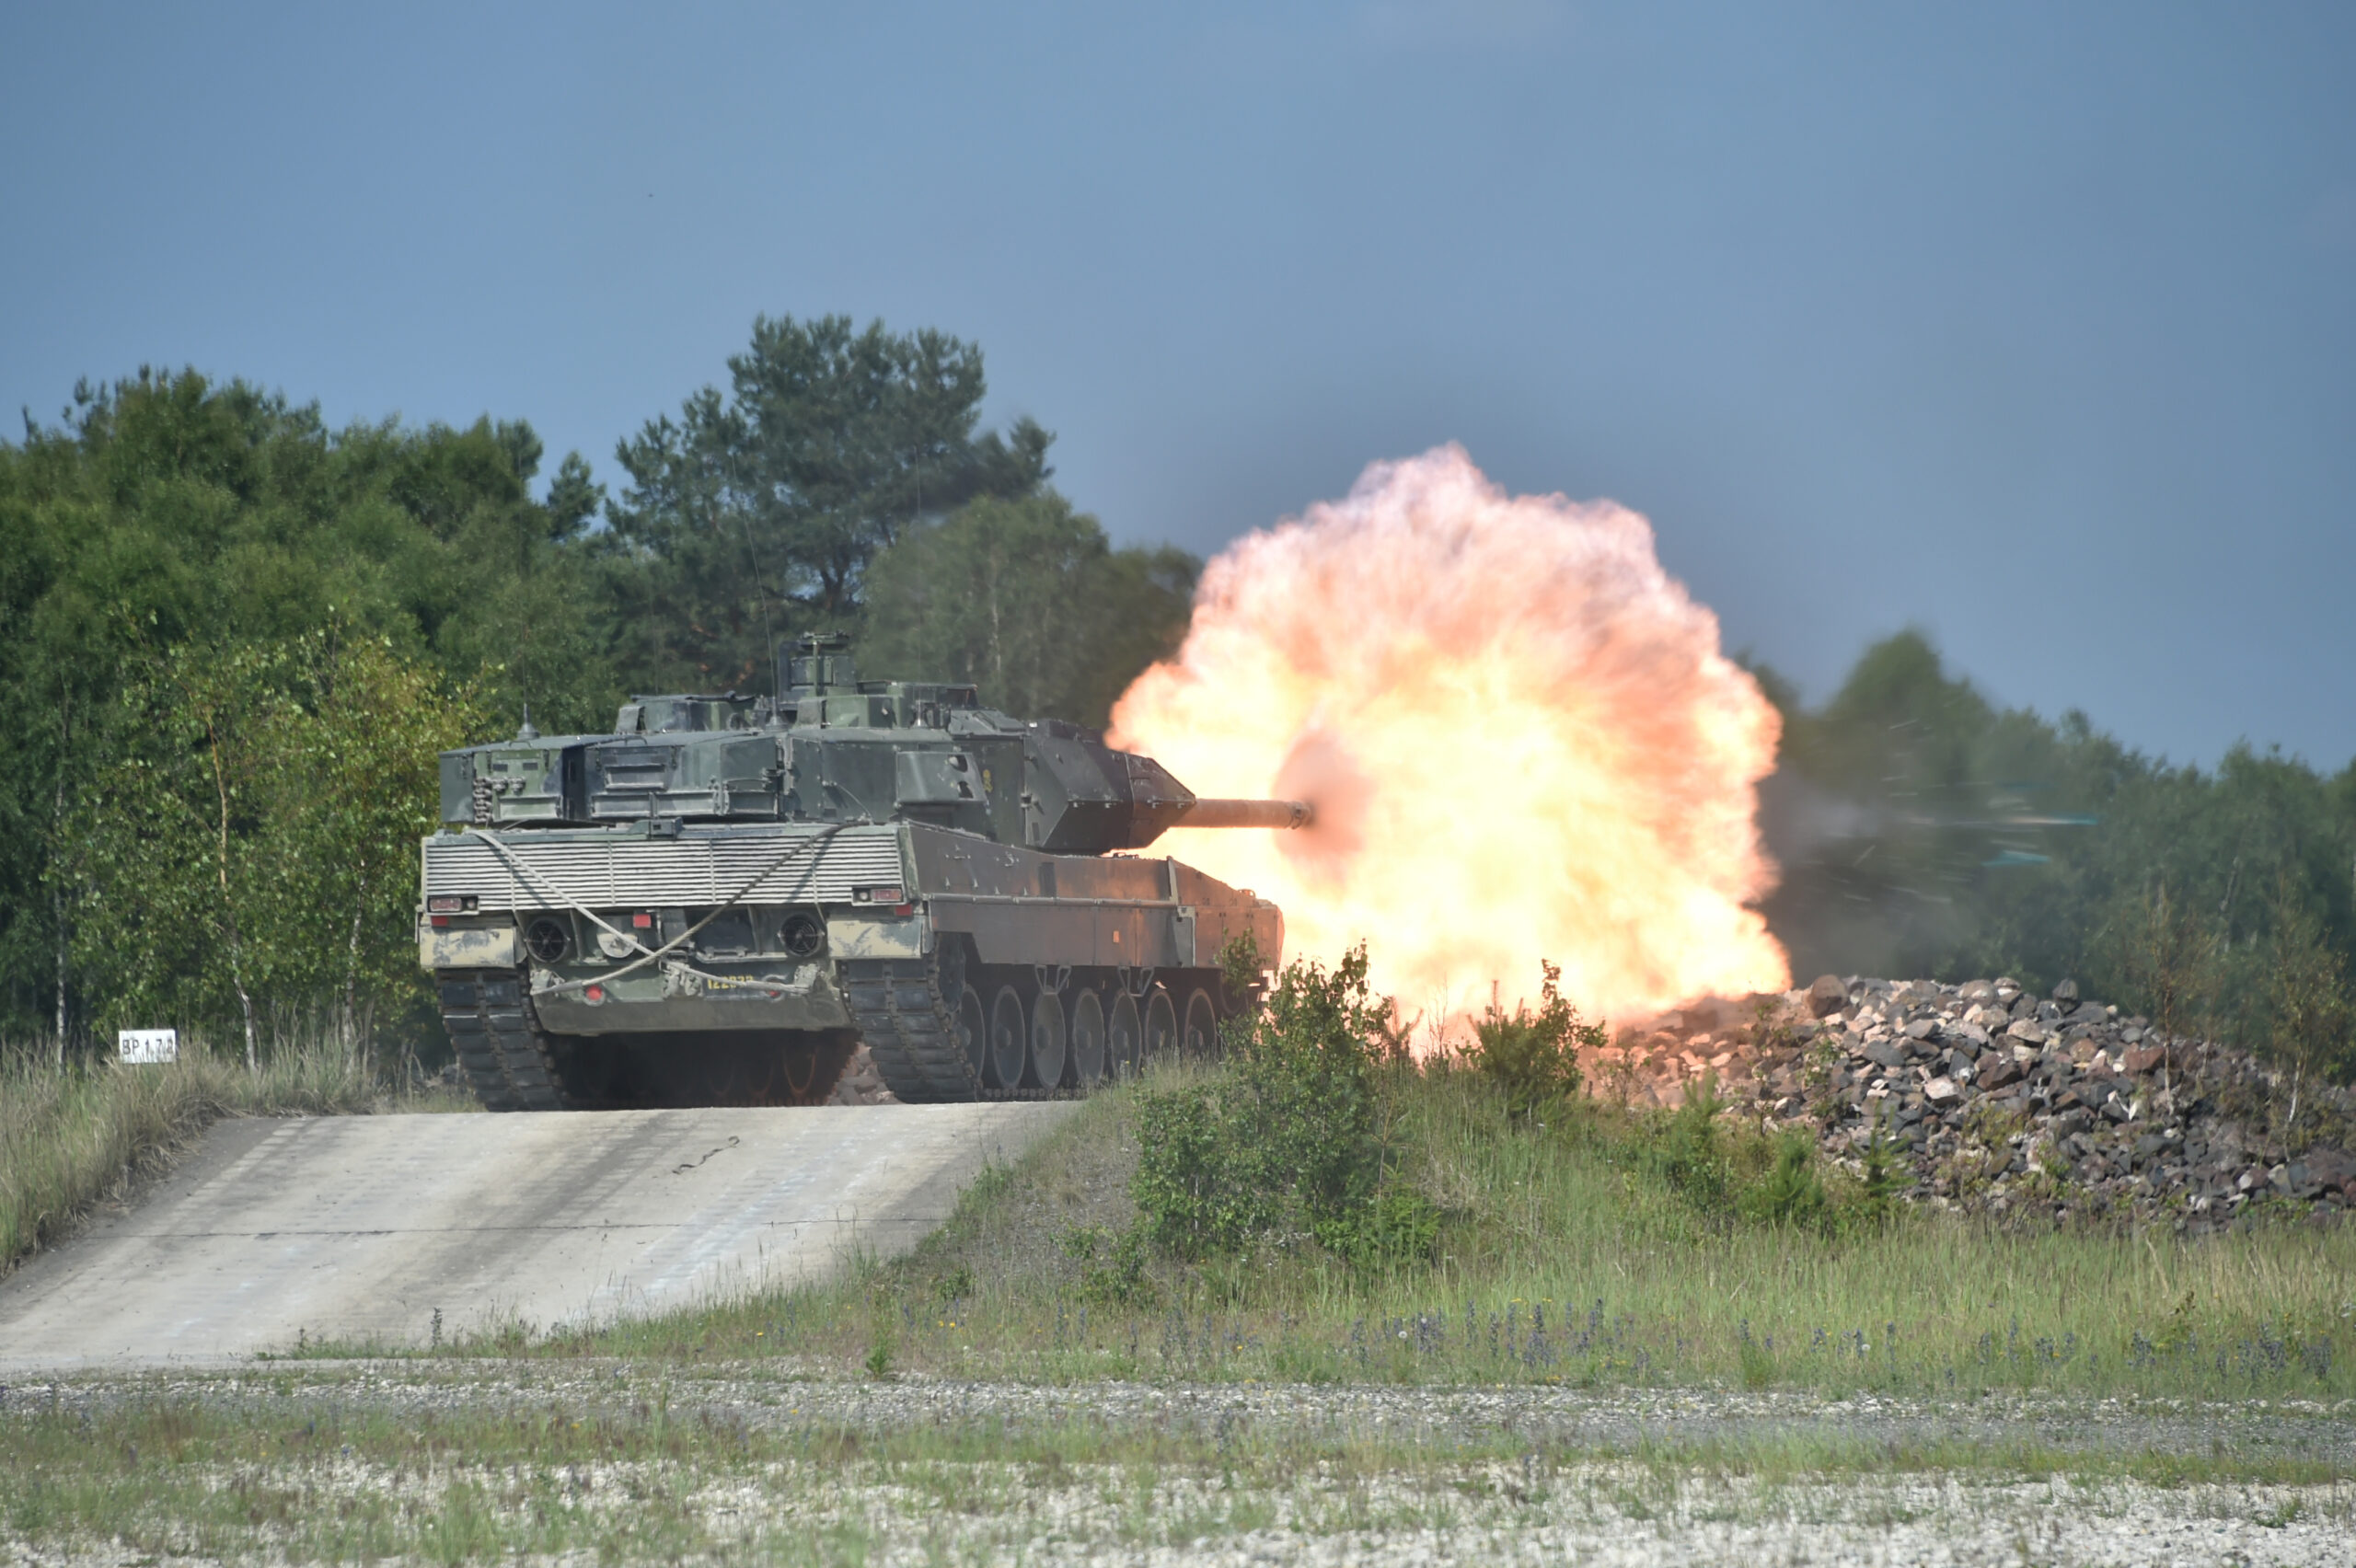 Swedish soldiers with the Wartofta Tank Company, Skaraborg Regiment in a Stridsvagn 122 main battle tank conduct the defensive operations lane during the Strong Europe Tank Challenge, June 7, 2018. U.S. Army Europe and the German Army co-host the third Strong Europe Tank Challenge at Grafenwoehr Training Area, June 3 - 8, 2018. The Strong Europe Tank Challenge is an annual training event designed to give participating nations a dynamic, productive and fun environment in which to foster military partnerships, form Soldier-level relationships, and share tactics, techniques and procedures. (U.S. Army photo by Gertrud Zach)